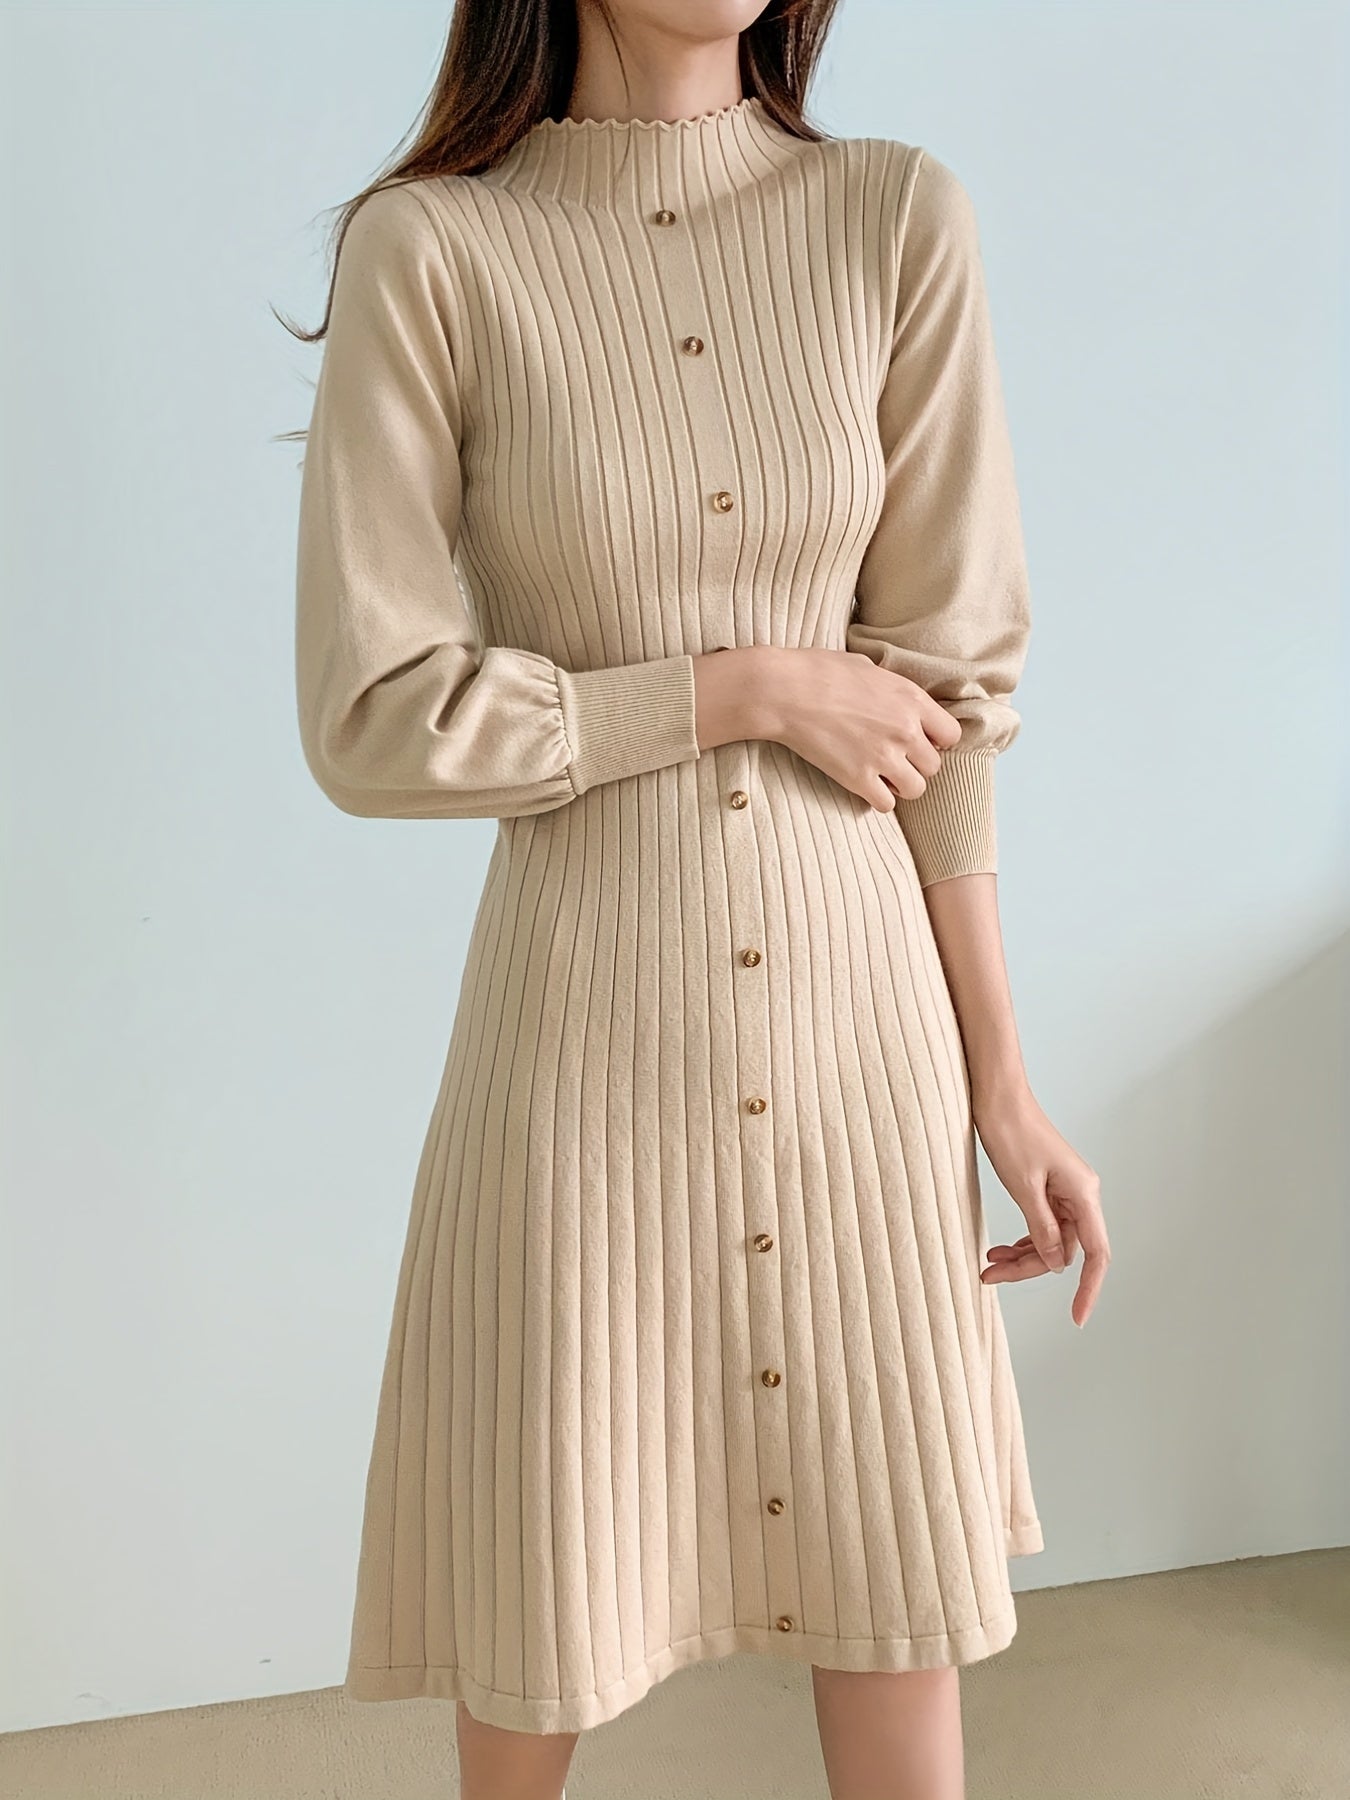 Antmvs Solid Ribbed Dress, Elegant Button Front Long Sleeve Dress, Women's Clothing